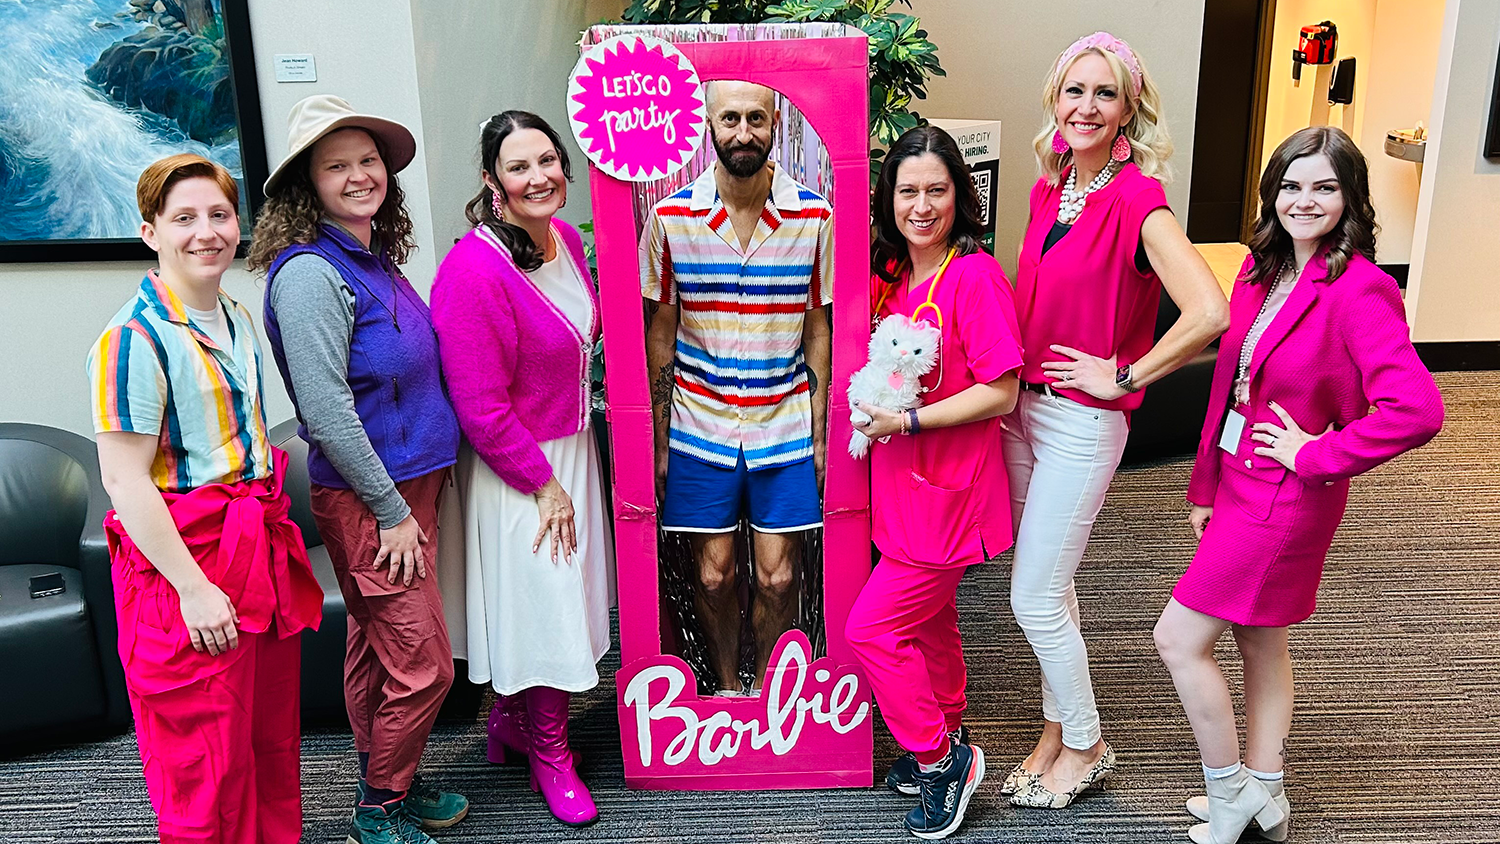 A group of Overland Park staff dressed as characters from Barbie for Halloween.